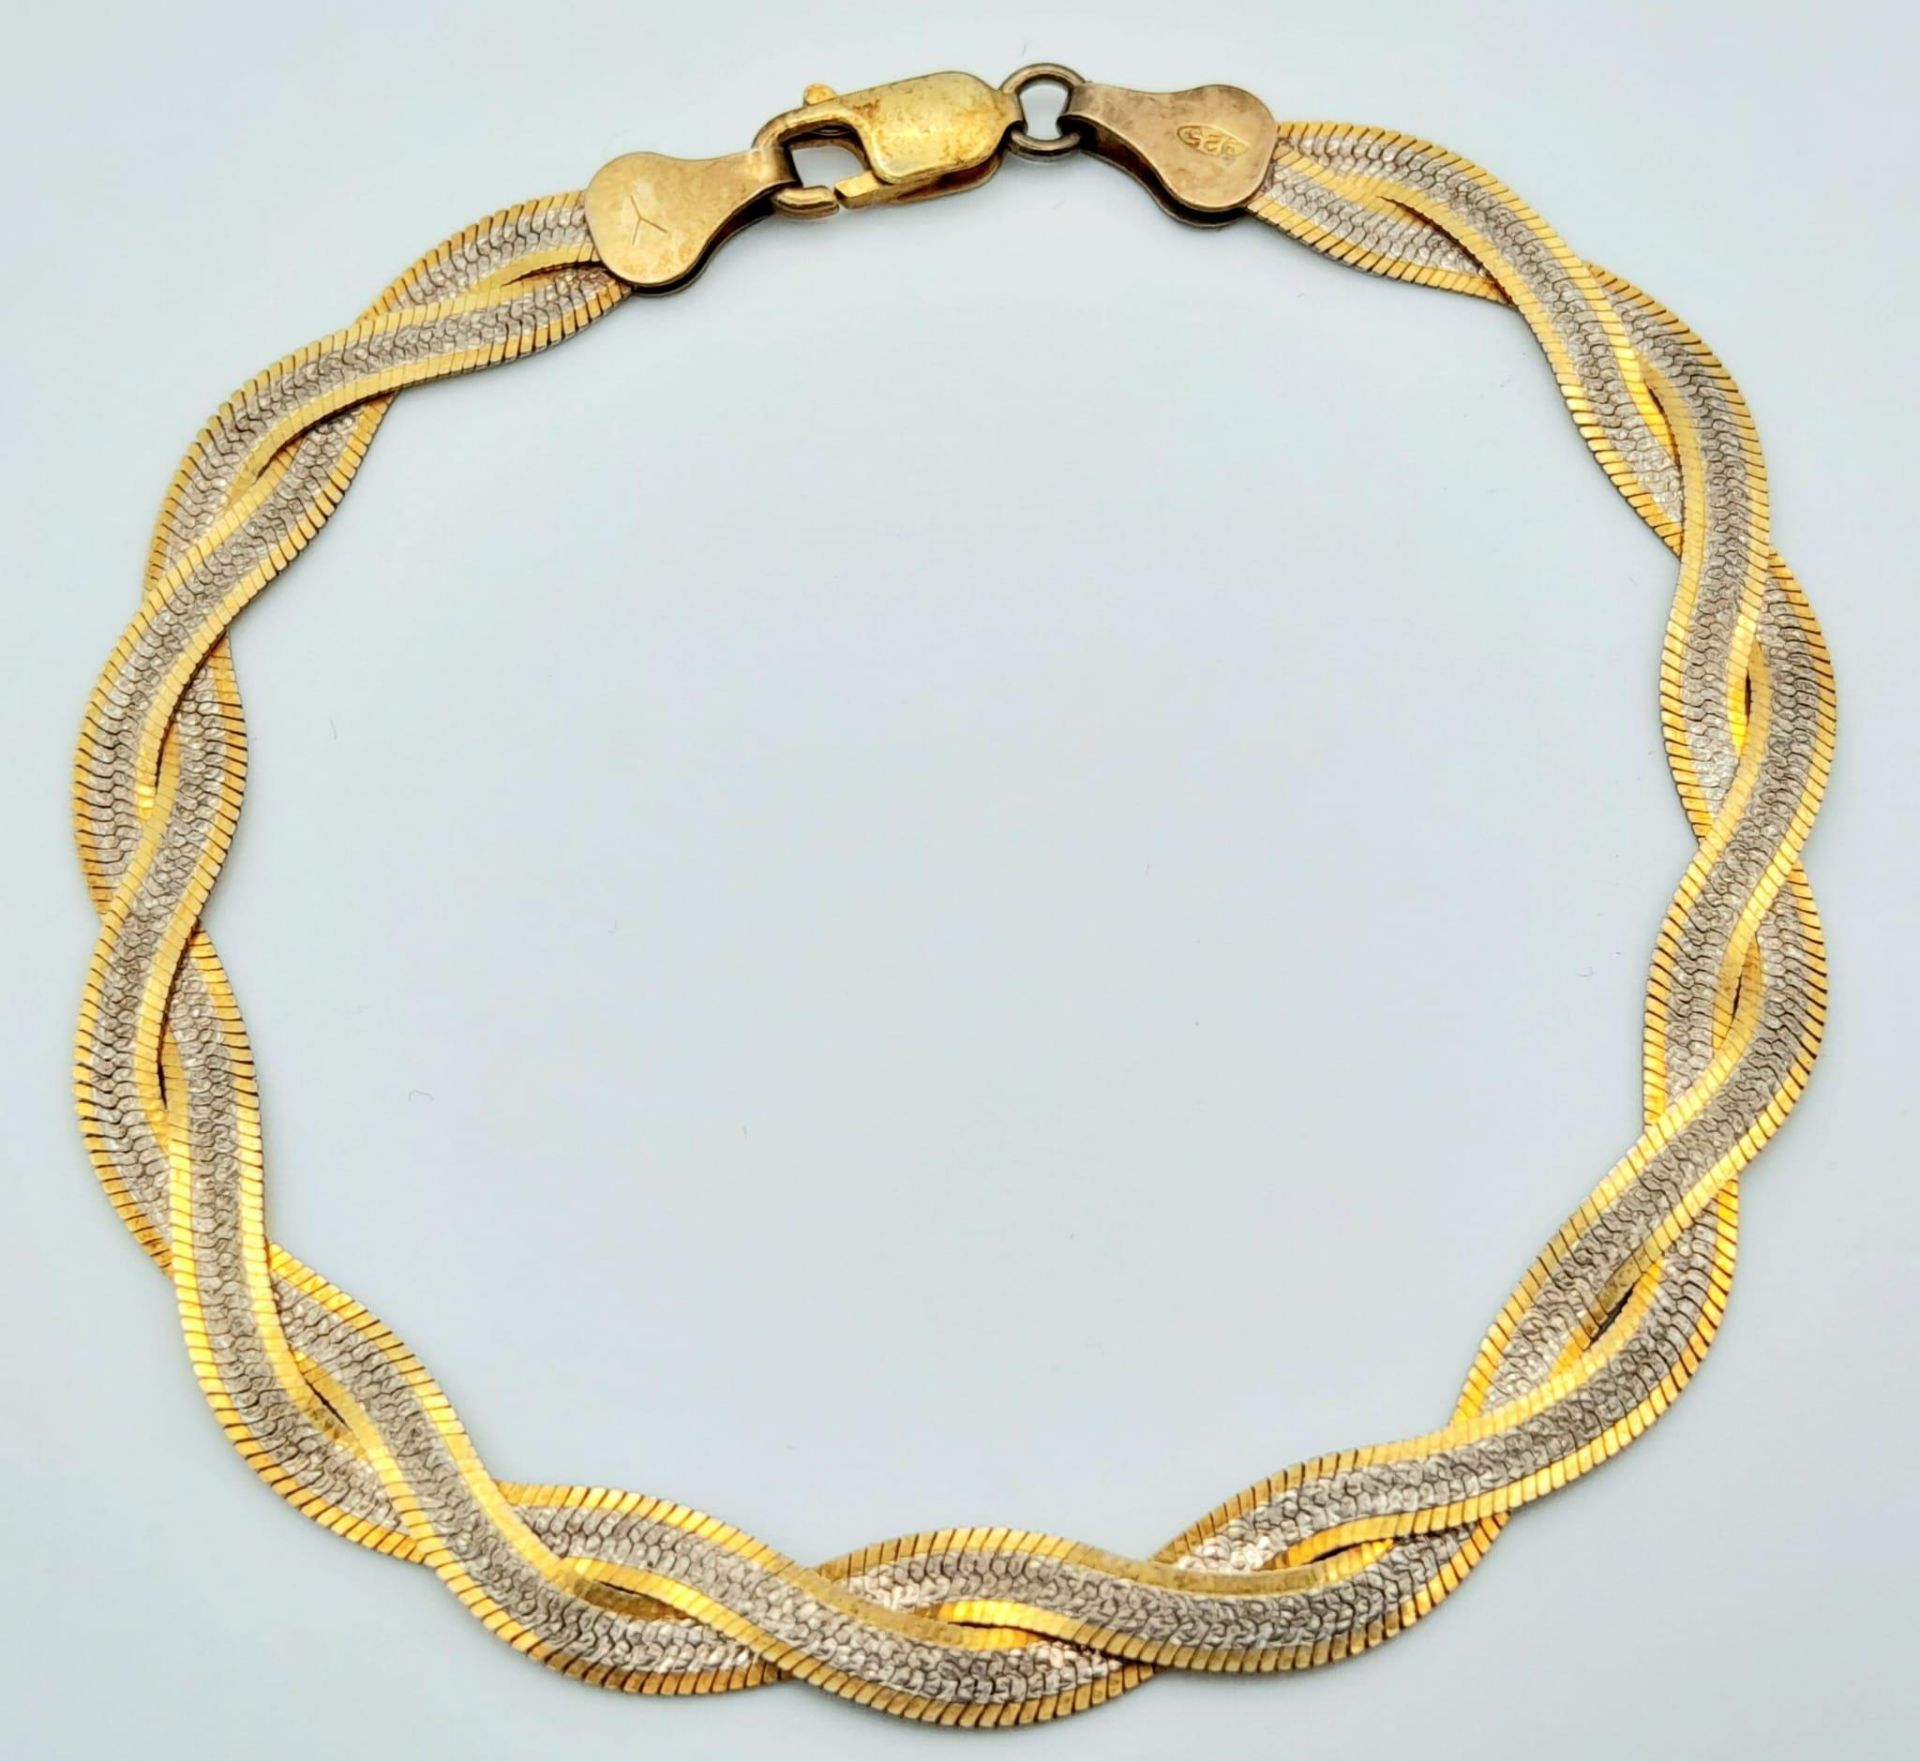 A 925 Sterling Silver Gilded and White Interwoven Flat Bracelet. 16cm. - Image 7 of 9